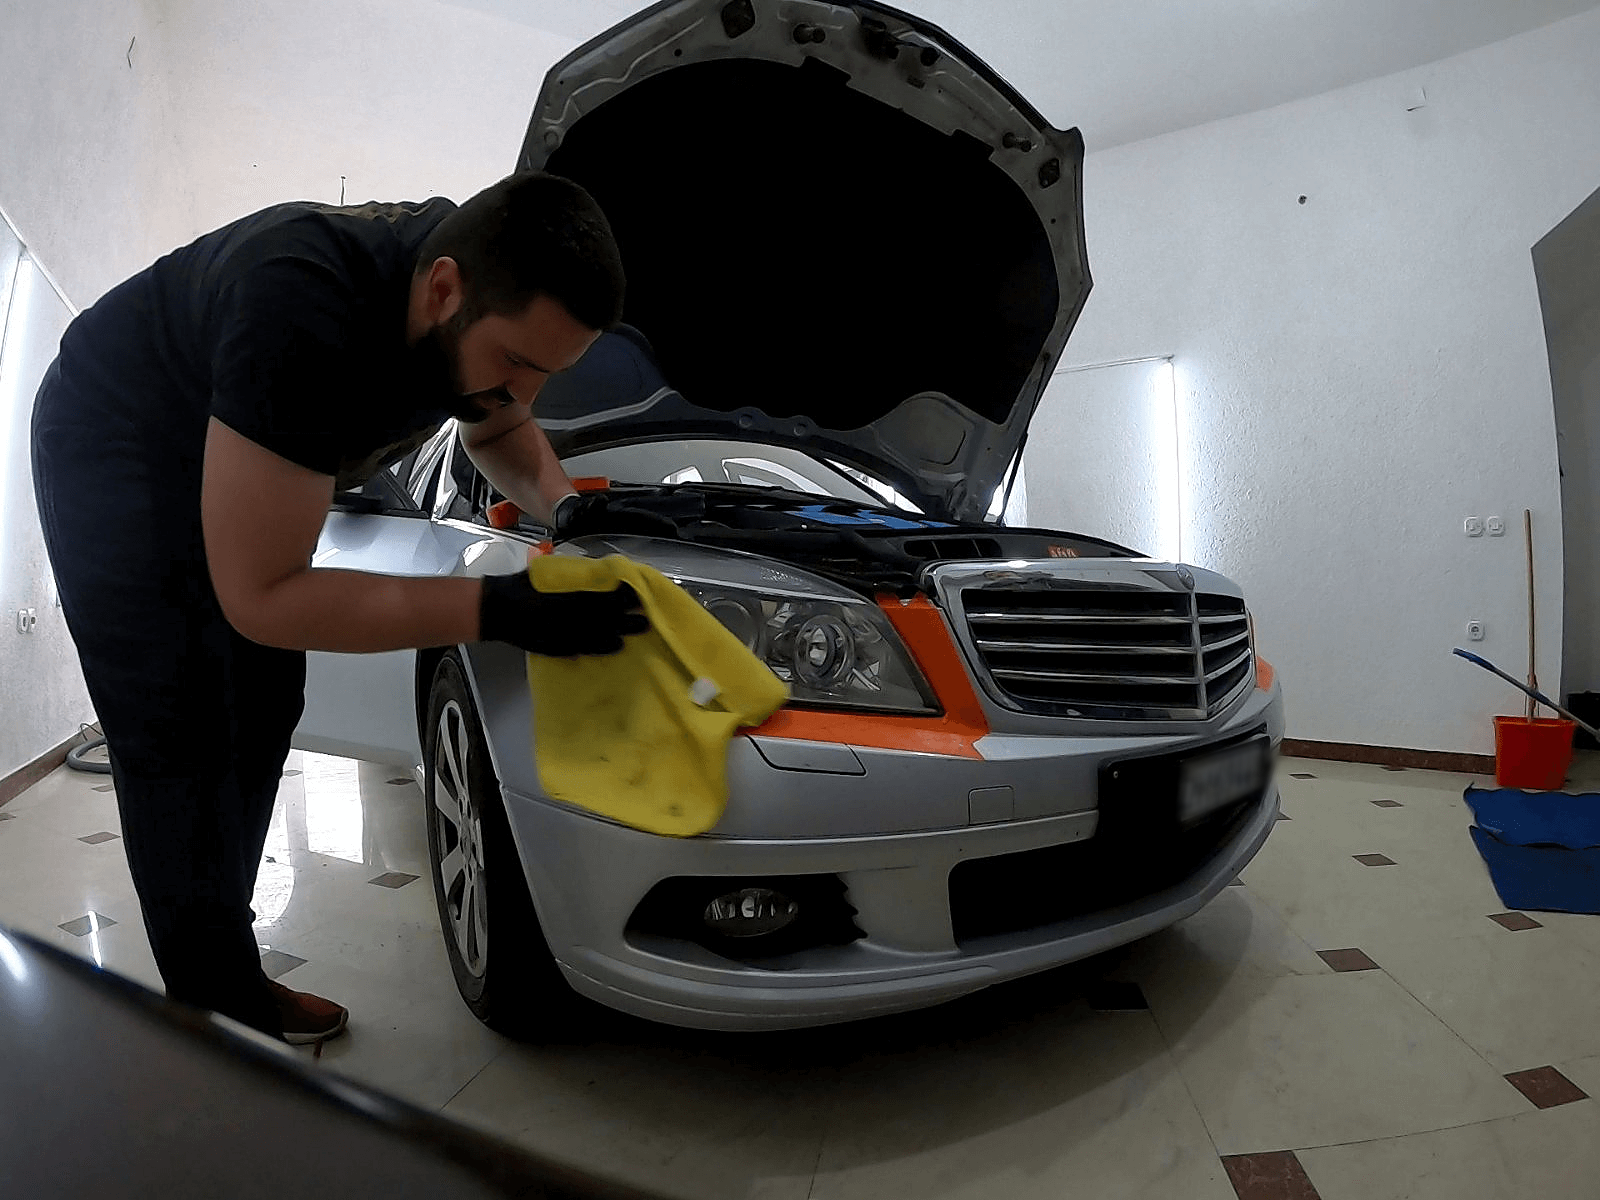 wiping the headlights with paper towel